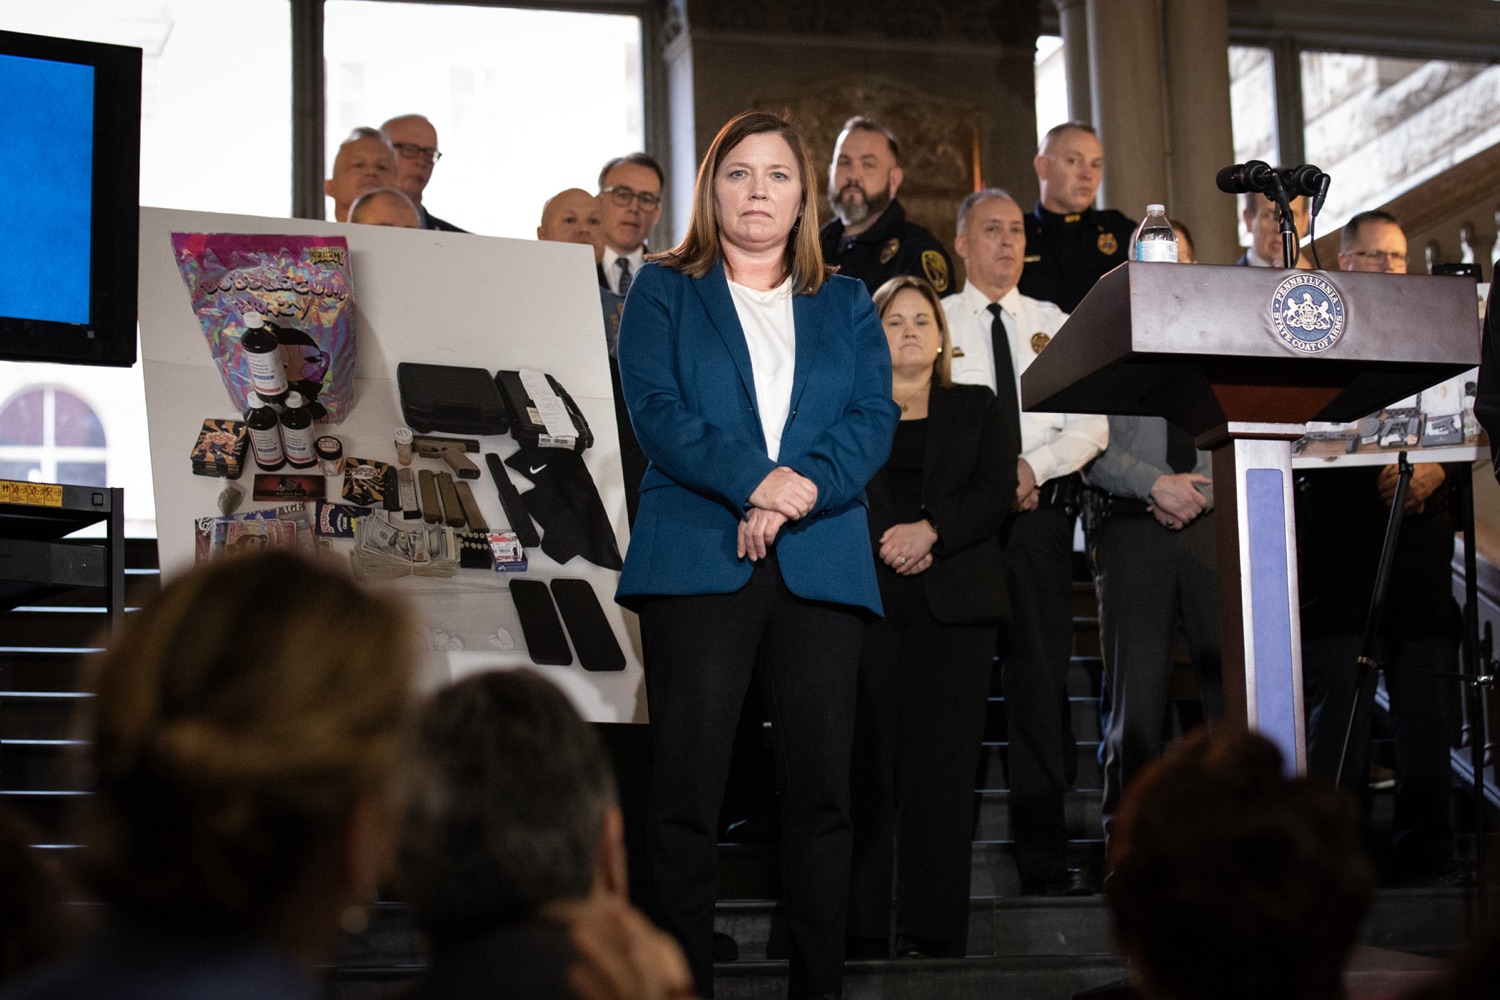 Pennsylvania Attorney General Michelle Henry and Allegheny County District Attorney Stephen Zappala were joined by law enforcement and community collaborators to announce a new public safety initiative in Allegheny County. Pictured here is Michelle Henry, Attorney General of Pennsylvania, delivering remarks during the event. Pittsburgh, Pennsylvania.<br><a href="https://filesource.amperwave.net/commonwealthofpa/photo/24297_oag_publicSafety_JAP_16.jpg" target="_blank">⇣ Download Photo</a>